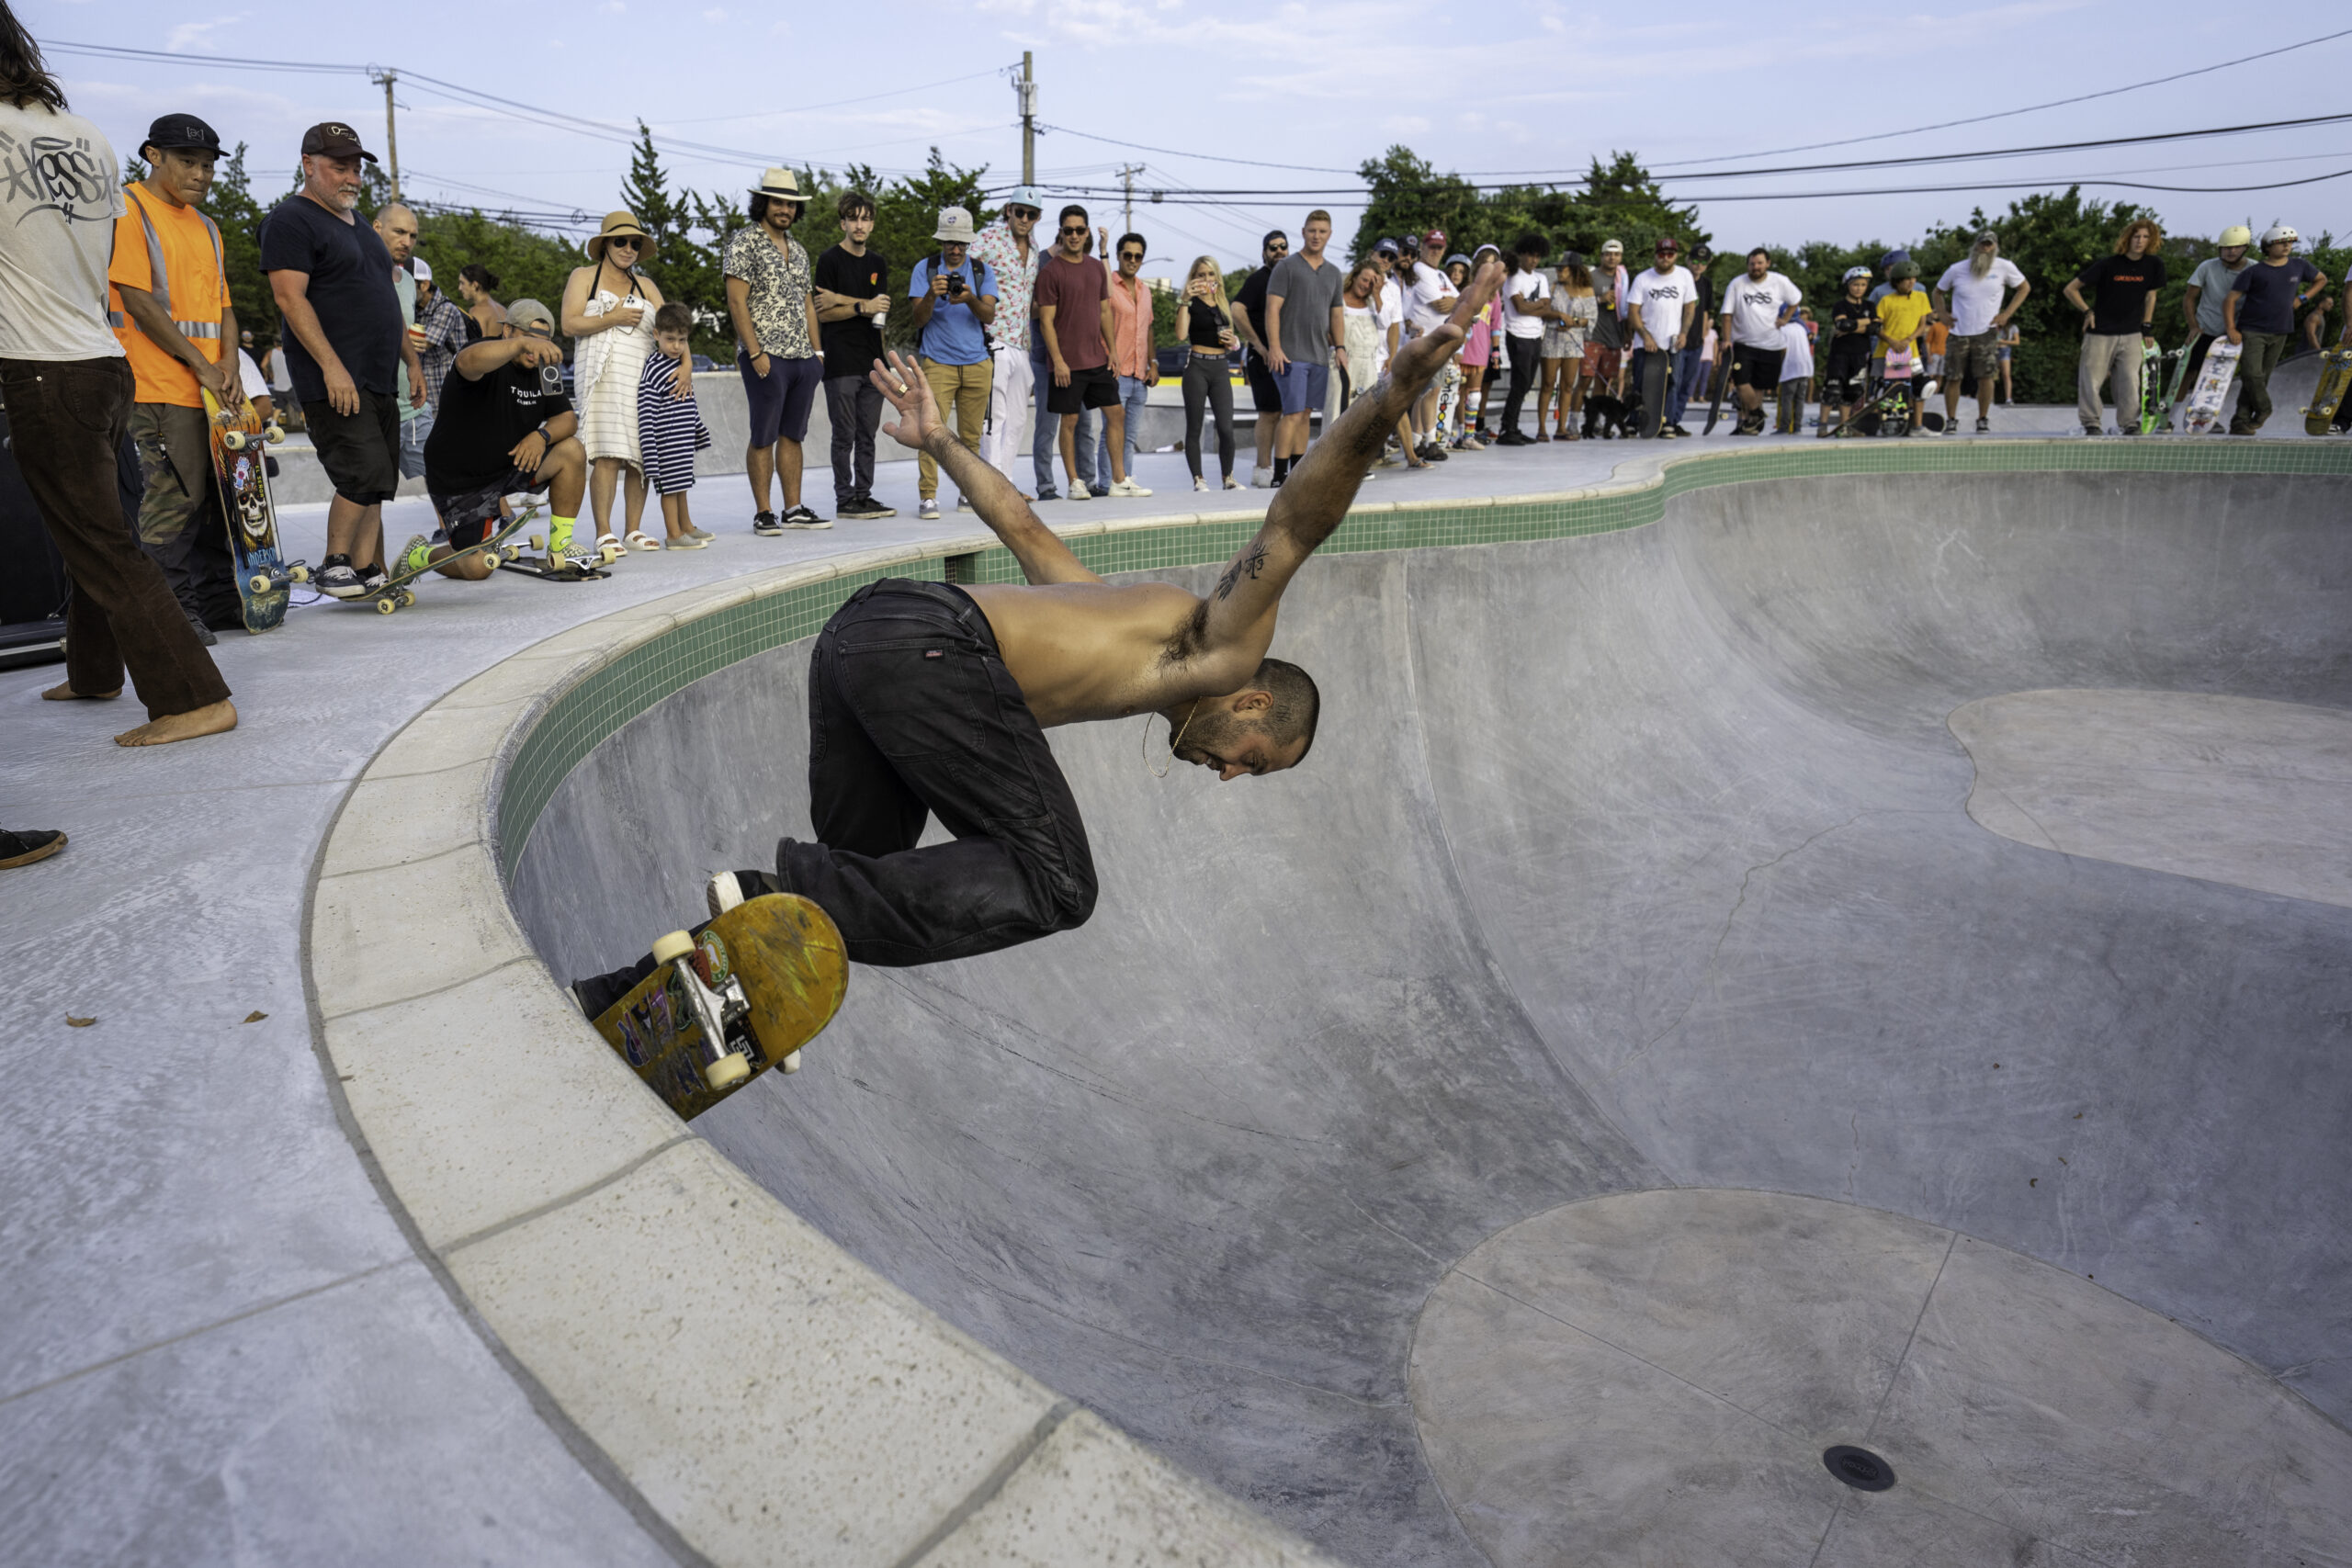 The Montauk community, as well as many visitors from across Long Island and New York City, came to skate and celebrate at the grand opening of the Montauk Skate Park on Friday. RON ESPOSITO PHOTOS